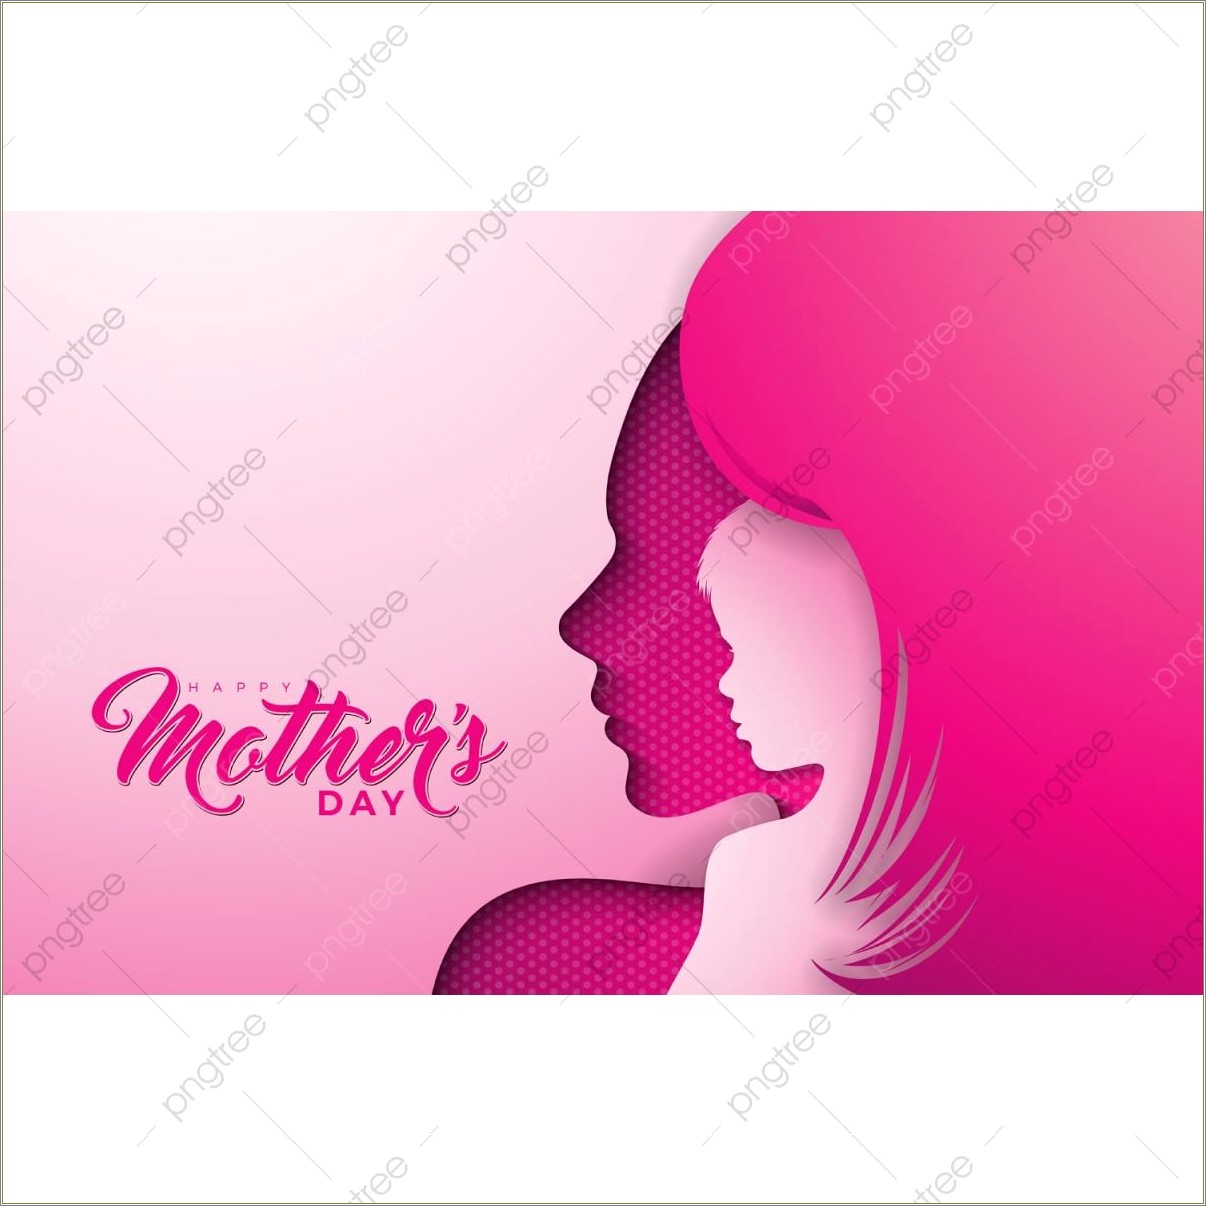 Happy Mothers Day After Effects Template Free